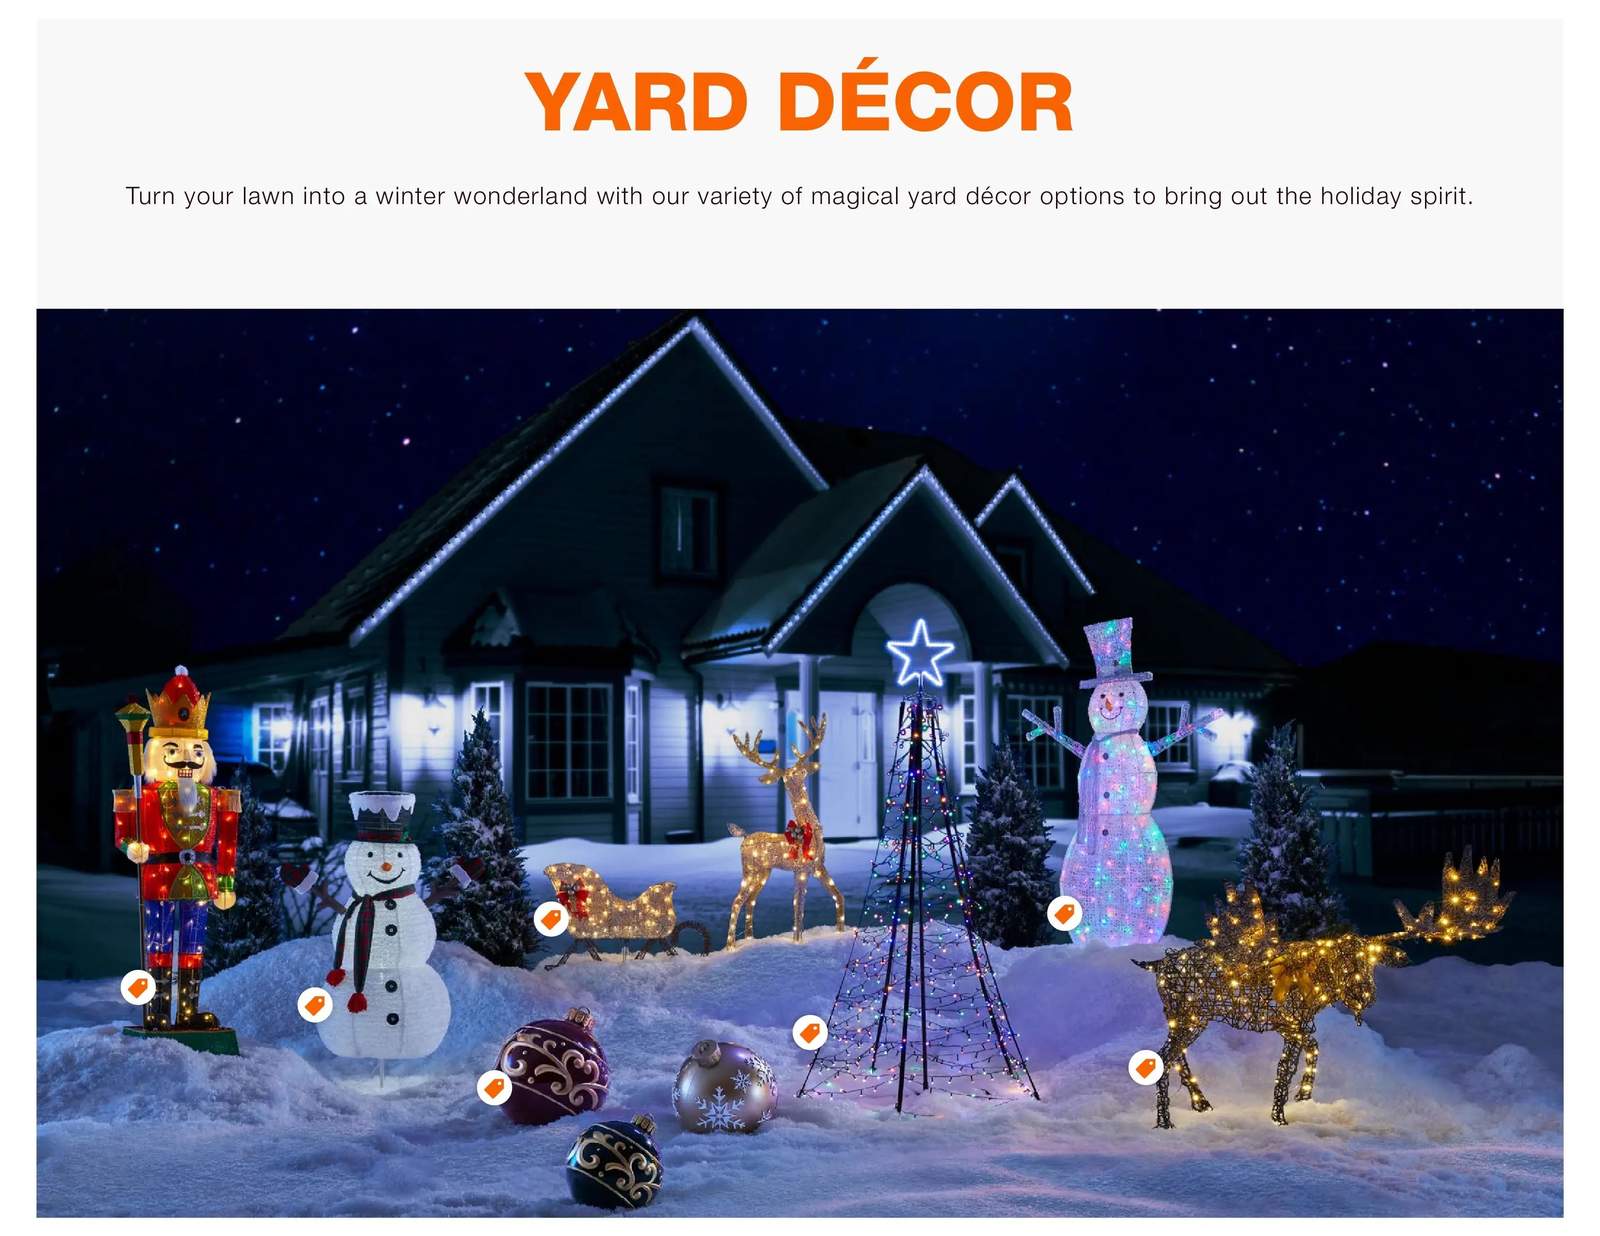 Home Depot 2022 Holiday Look Book October 20 to December 26